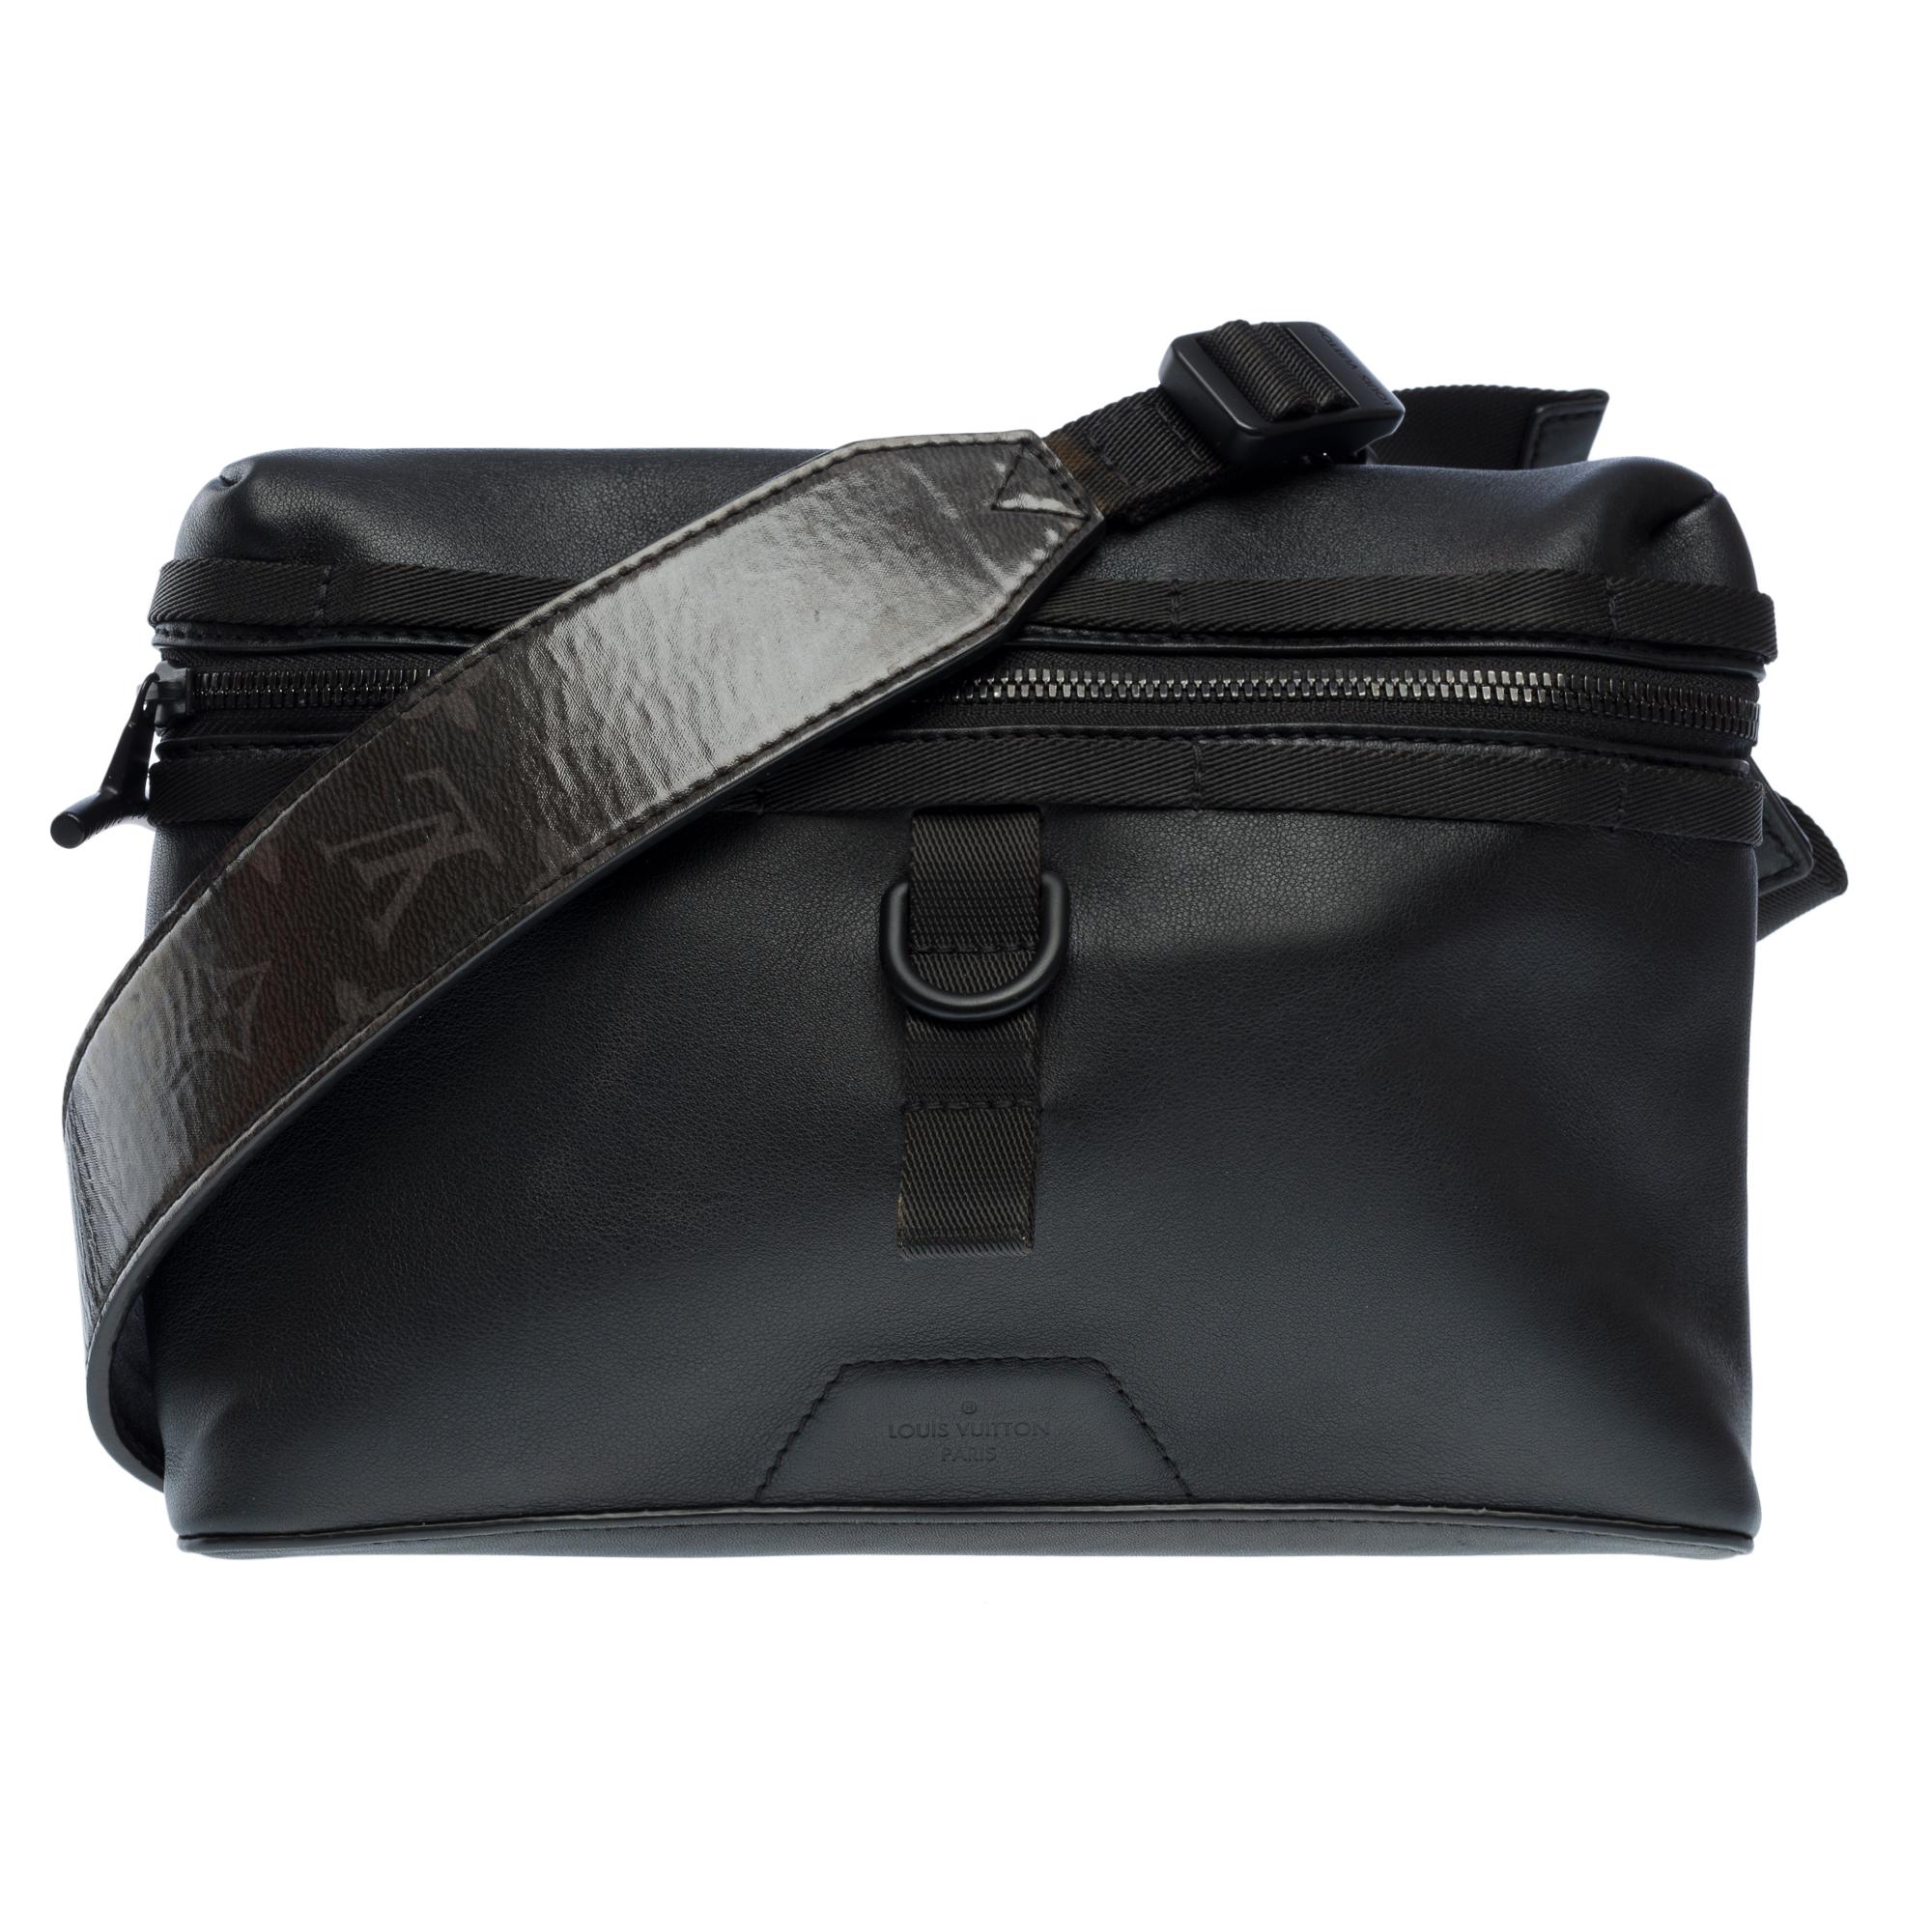 Louis​ ​Vuitton​ ​Messenger​ ​PM​ ​Dark​ ​Infinity​ ​Limited​ ​Edition​ ​Men’s​ ​Fall-Winter​ ​2018​ ​Fashion​ ​Show Crossbody​ ​bag​ ​in​ ​black​ ​calfskin​ ​leather,​ ​blackened​ ​metal​ ​trim,​ ​adjustable​ ​canvas​ ​shoulder​ ​strap​ ​and​